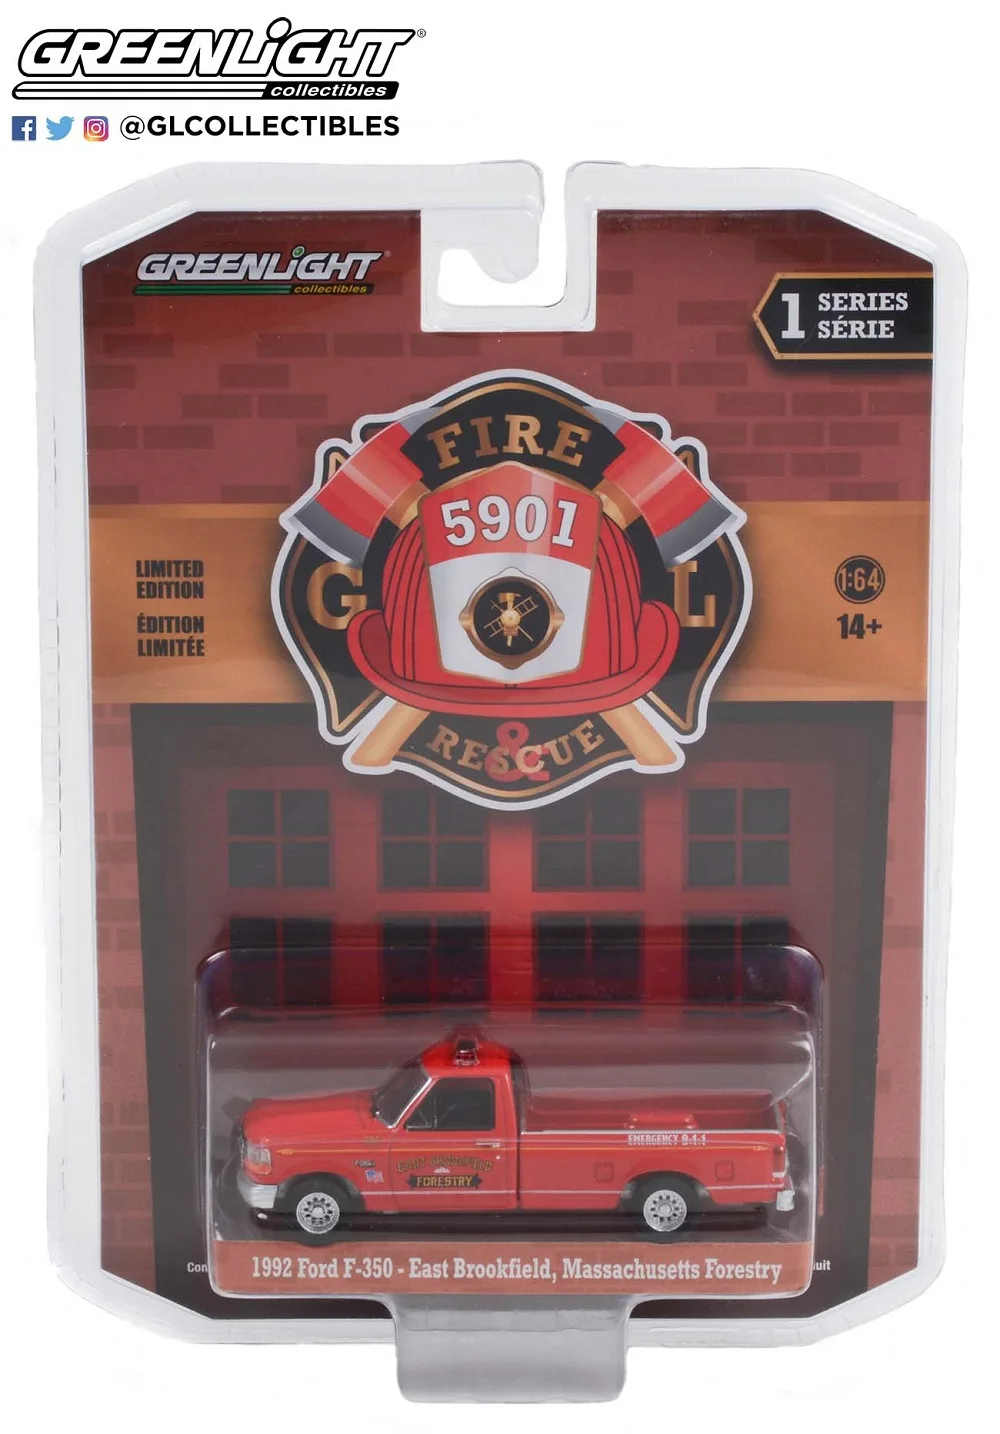 

1/64 GREENLIGHT 1992 Ford F-350 Raptor Pickup Massachusetts Forestry Collector die-cast alloy trolley model